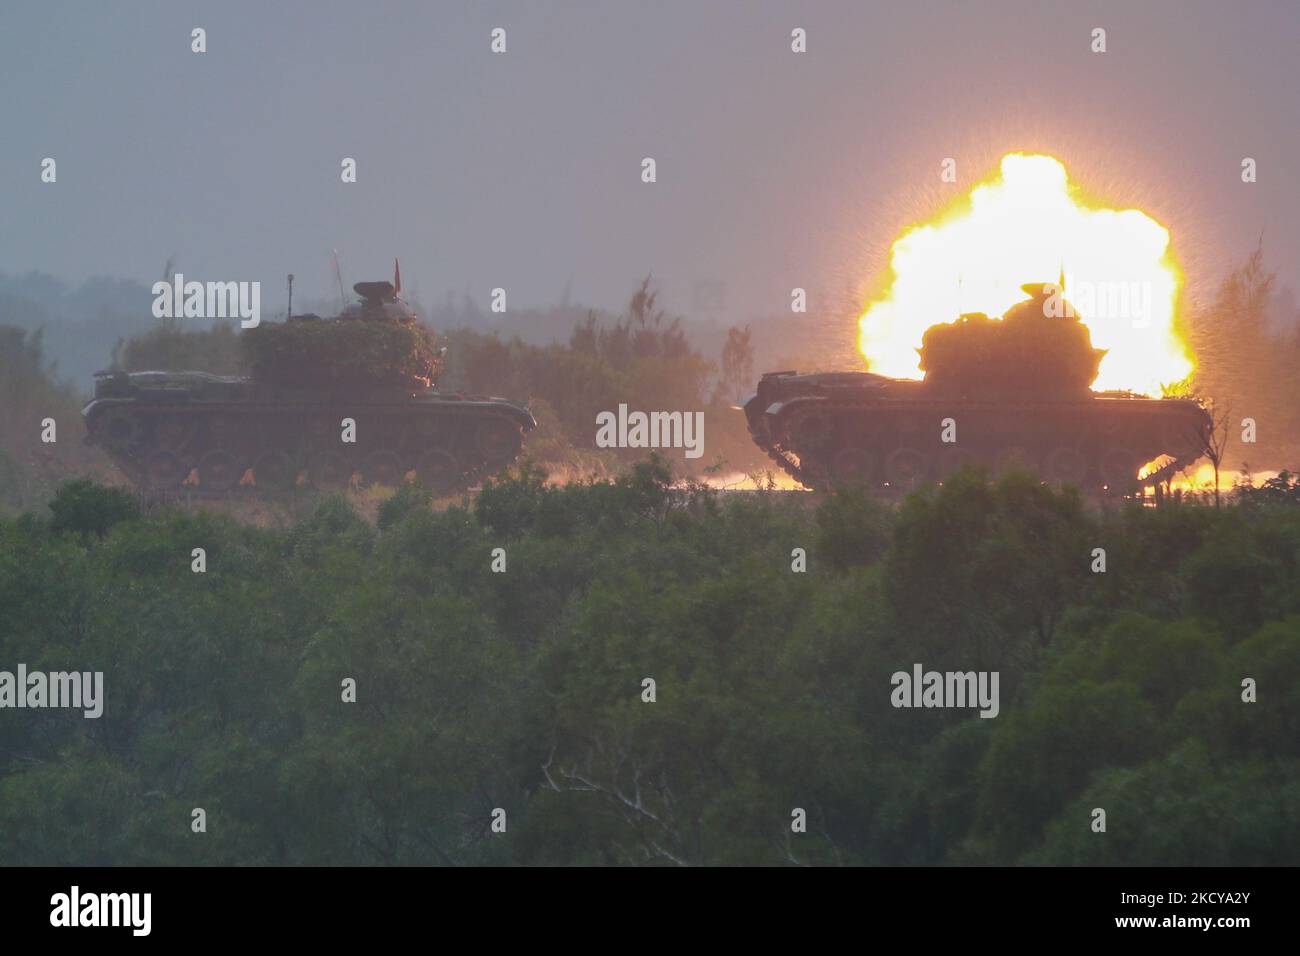 M60-A3 tanks fire cannons during a live ammunition military drill at an unnamed location, amid rising tensions with China, in Hsinchu, Taiwan, 21 December 2021. Taiwan has been facing intensifying military threats from China including Chinese PLA warplanes sent to cruise around the island, while the US has been offering more arm sales to Taiwan. (Photo by Ceng Shou Yi/NurPhoto) Stock Photo